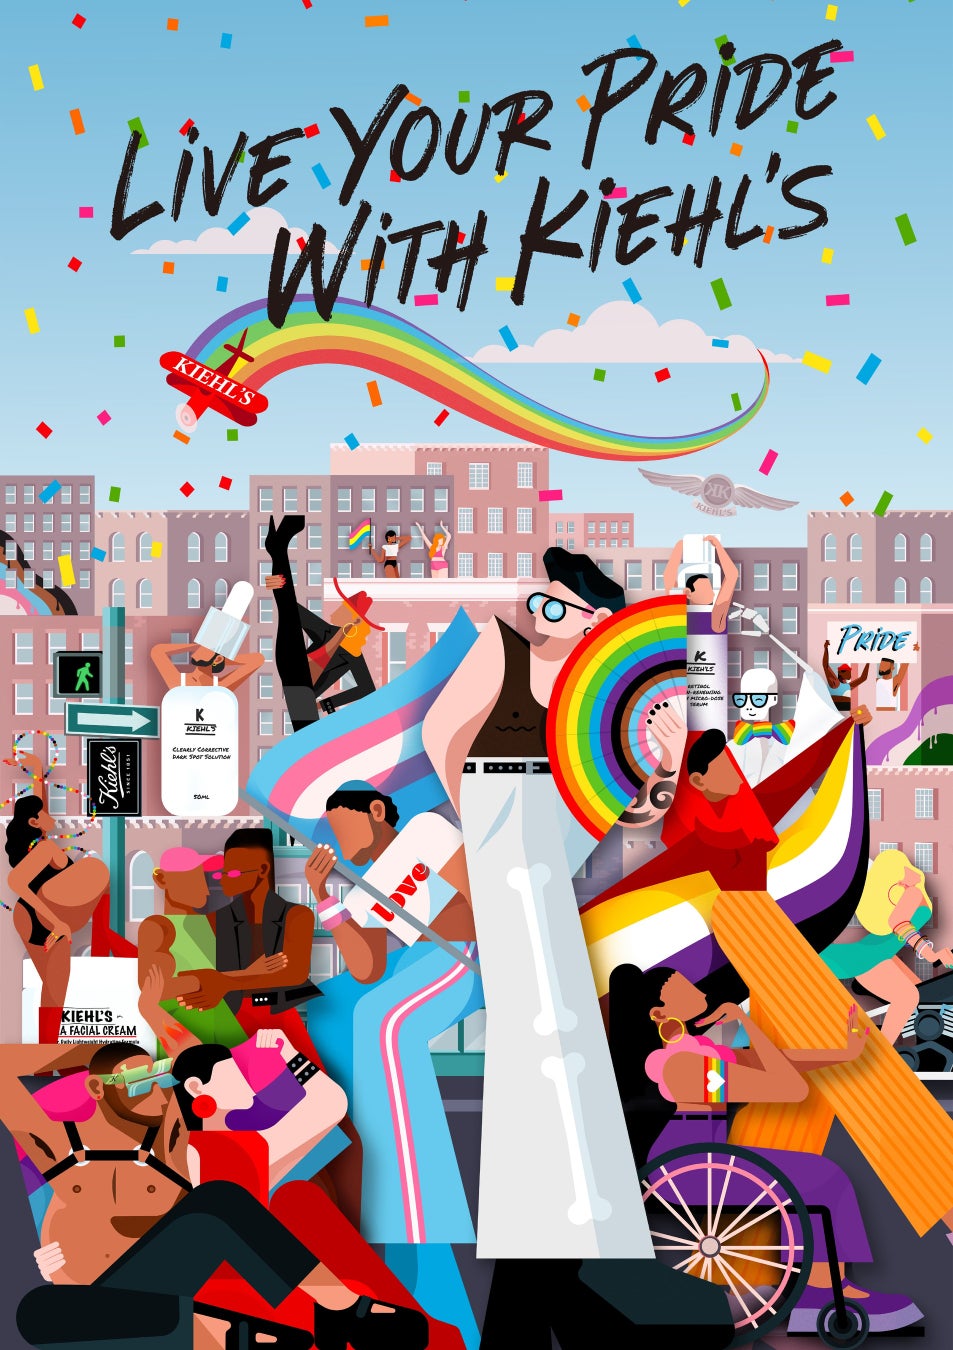 『LIVE YOUR PRIDE WITH KIEHL’S』～ありのままの自分を、キールズと！～